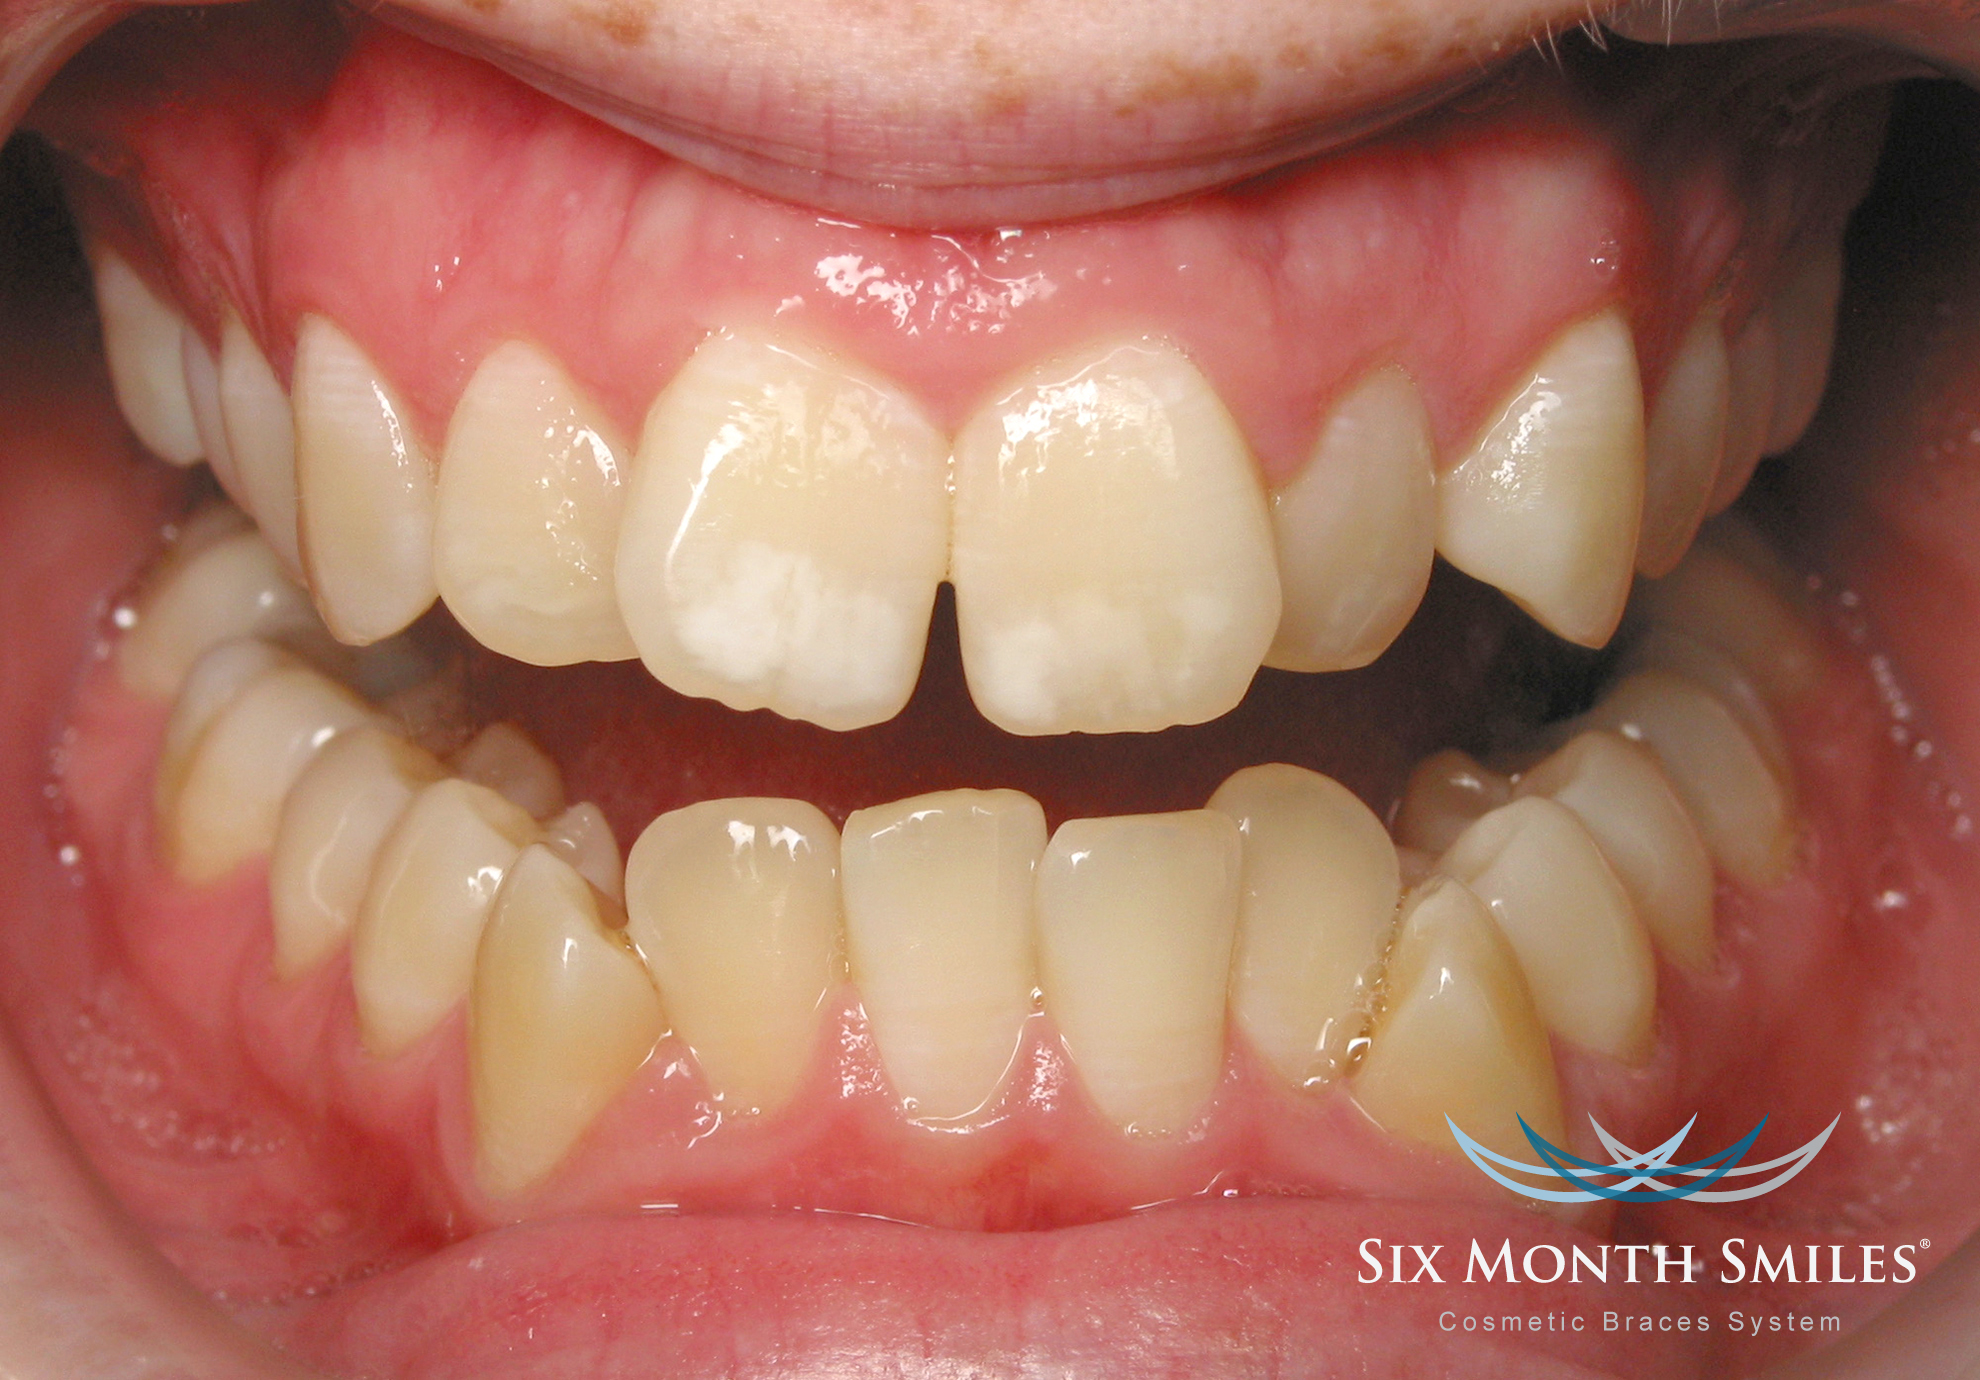 Before photo of patient teeth Six Month Smiles cosmetic adult braces orthodontic